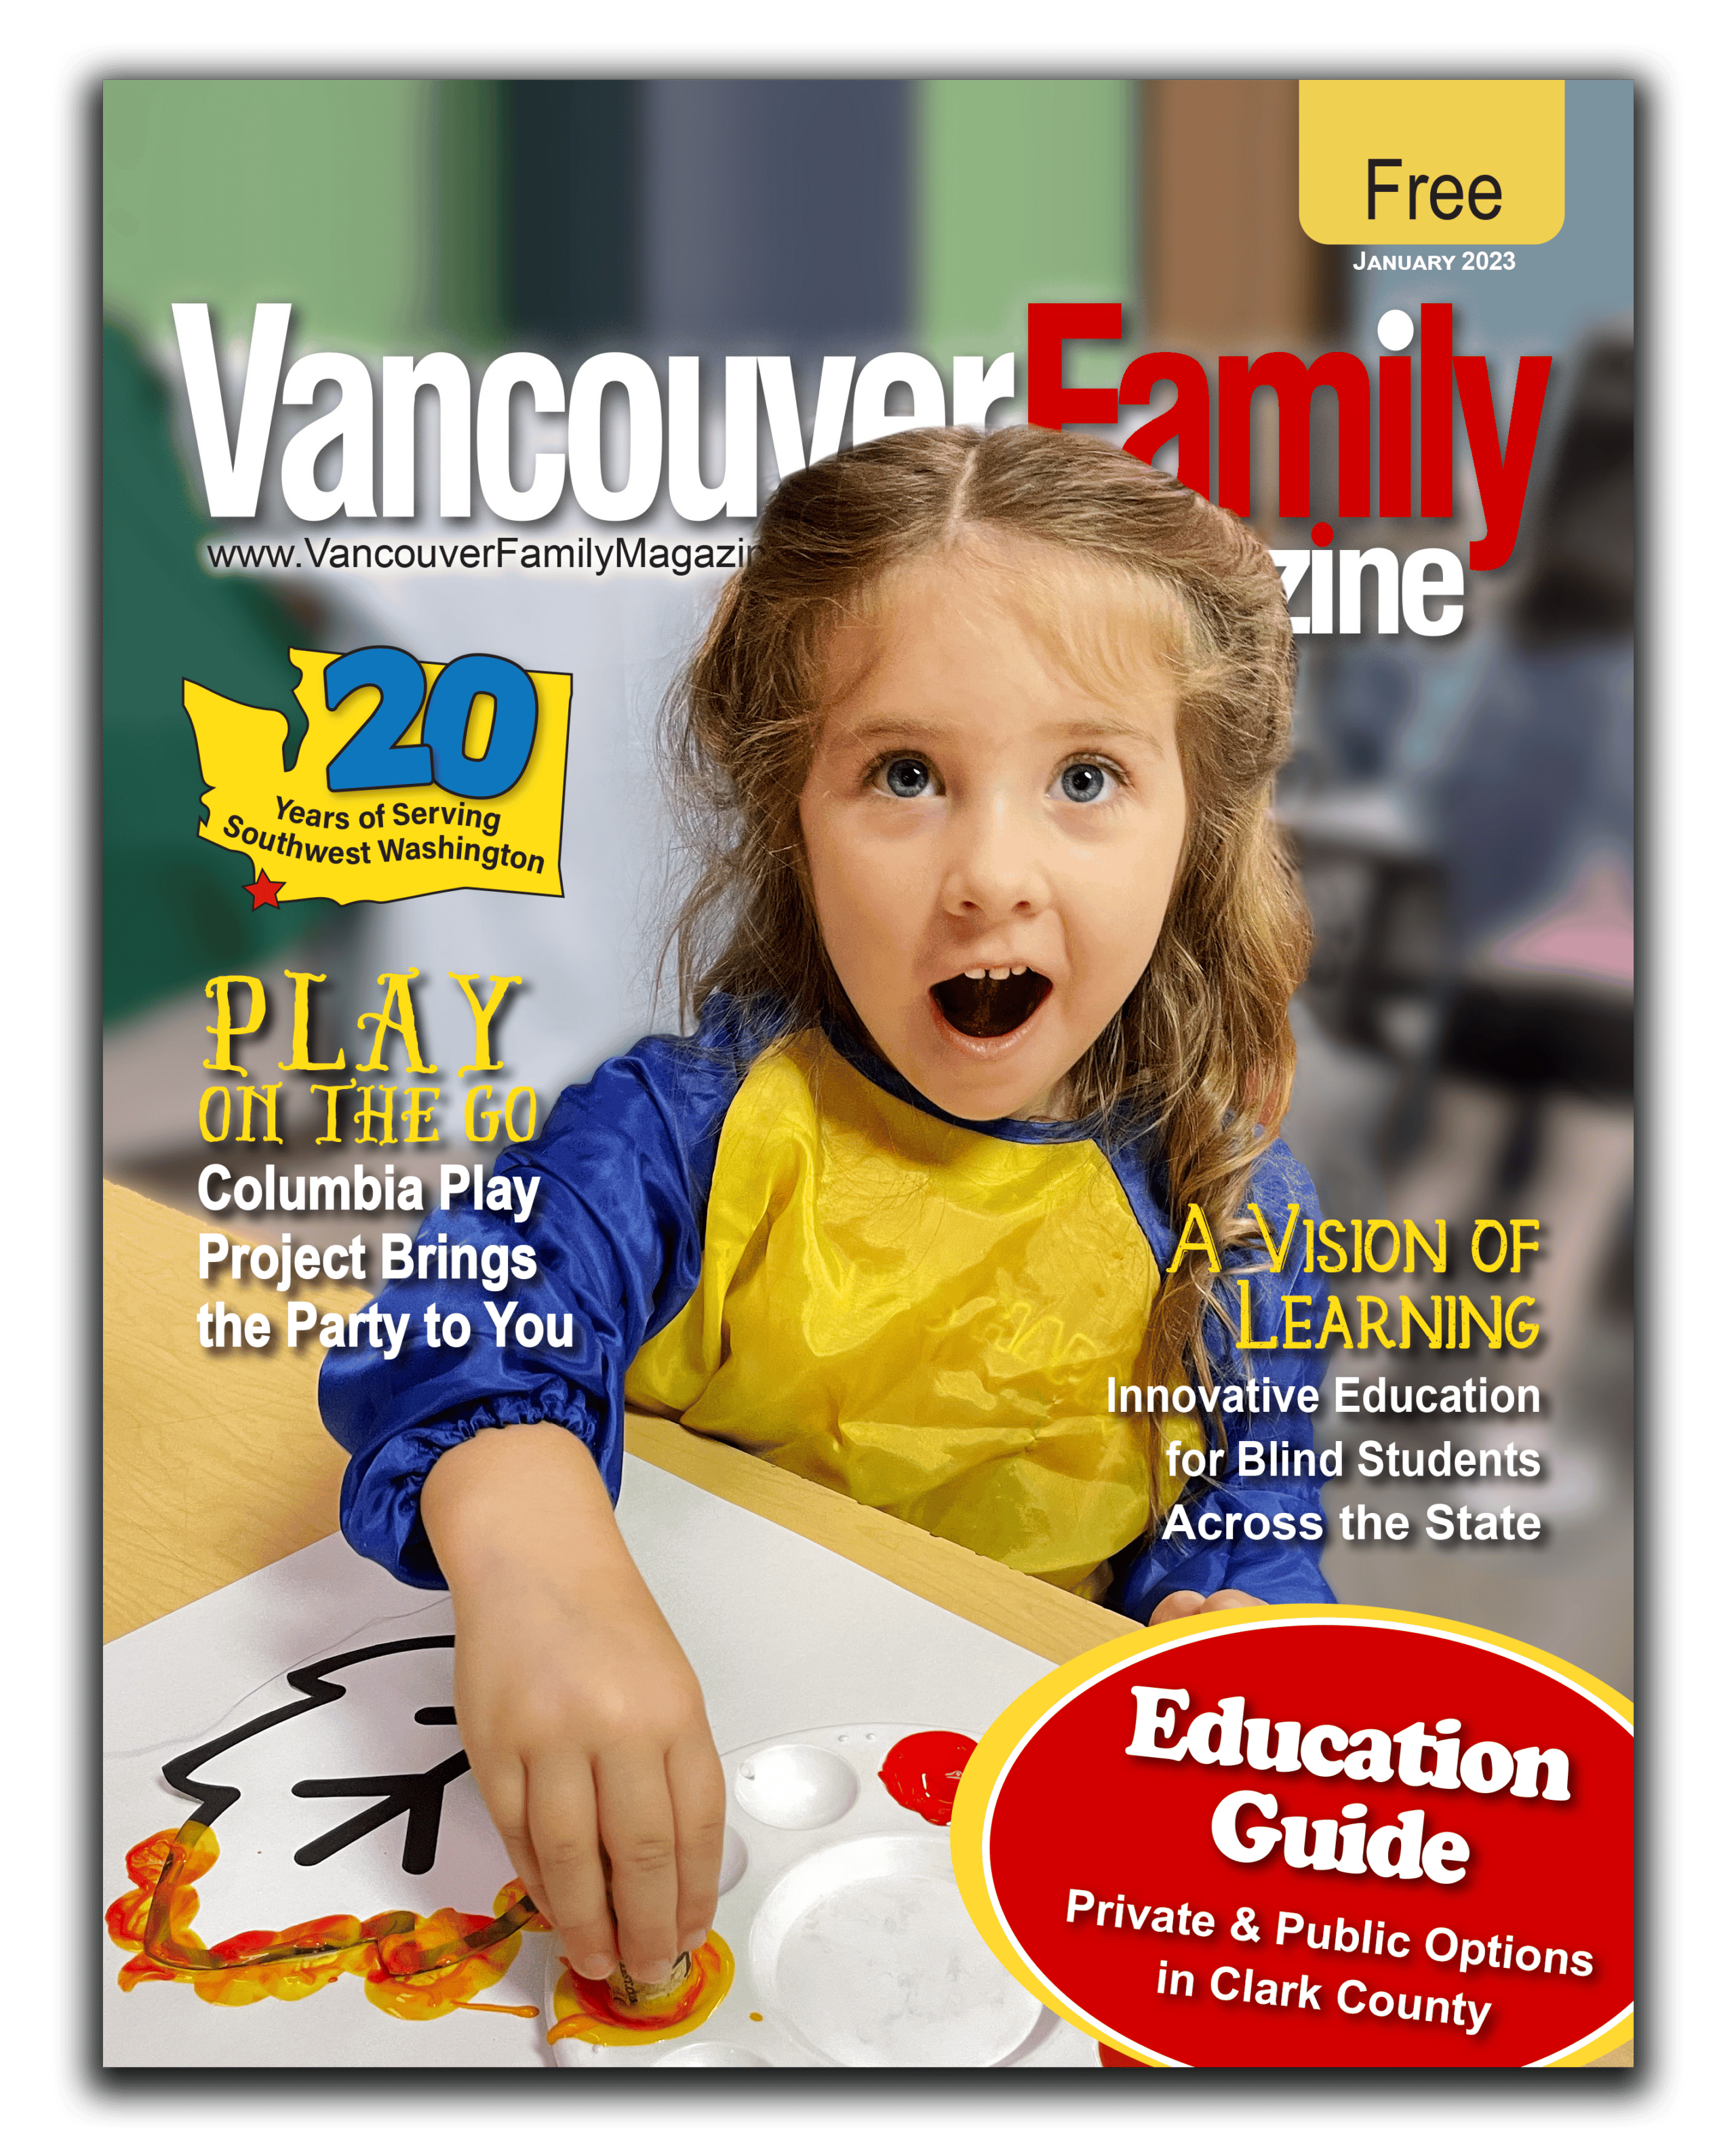 January 2023 issue cover of Vancouver Family Magazine, featuring a young girl painting while looking up at the camera with her mouth open in discovery